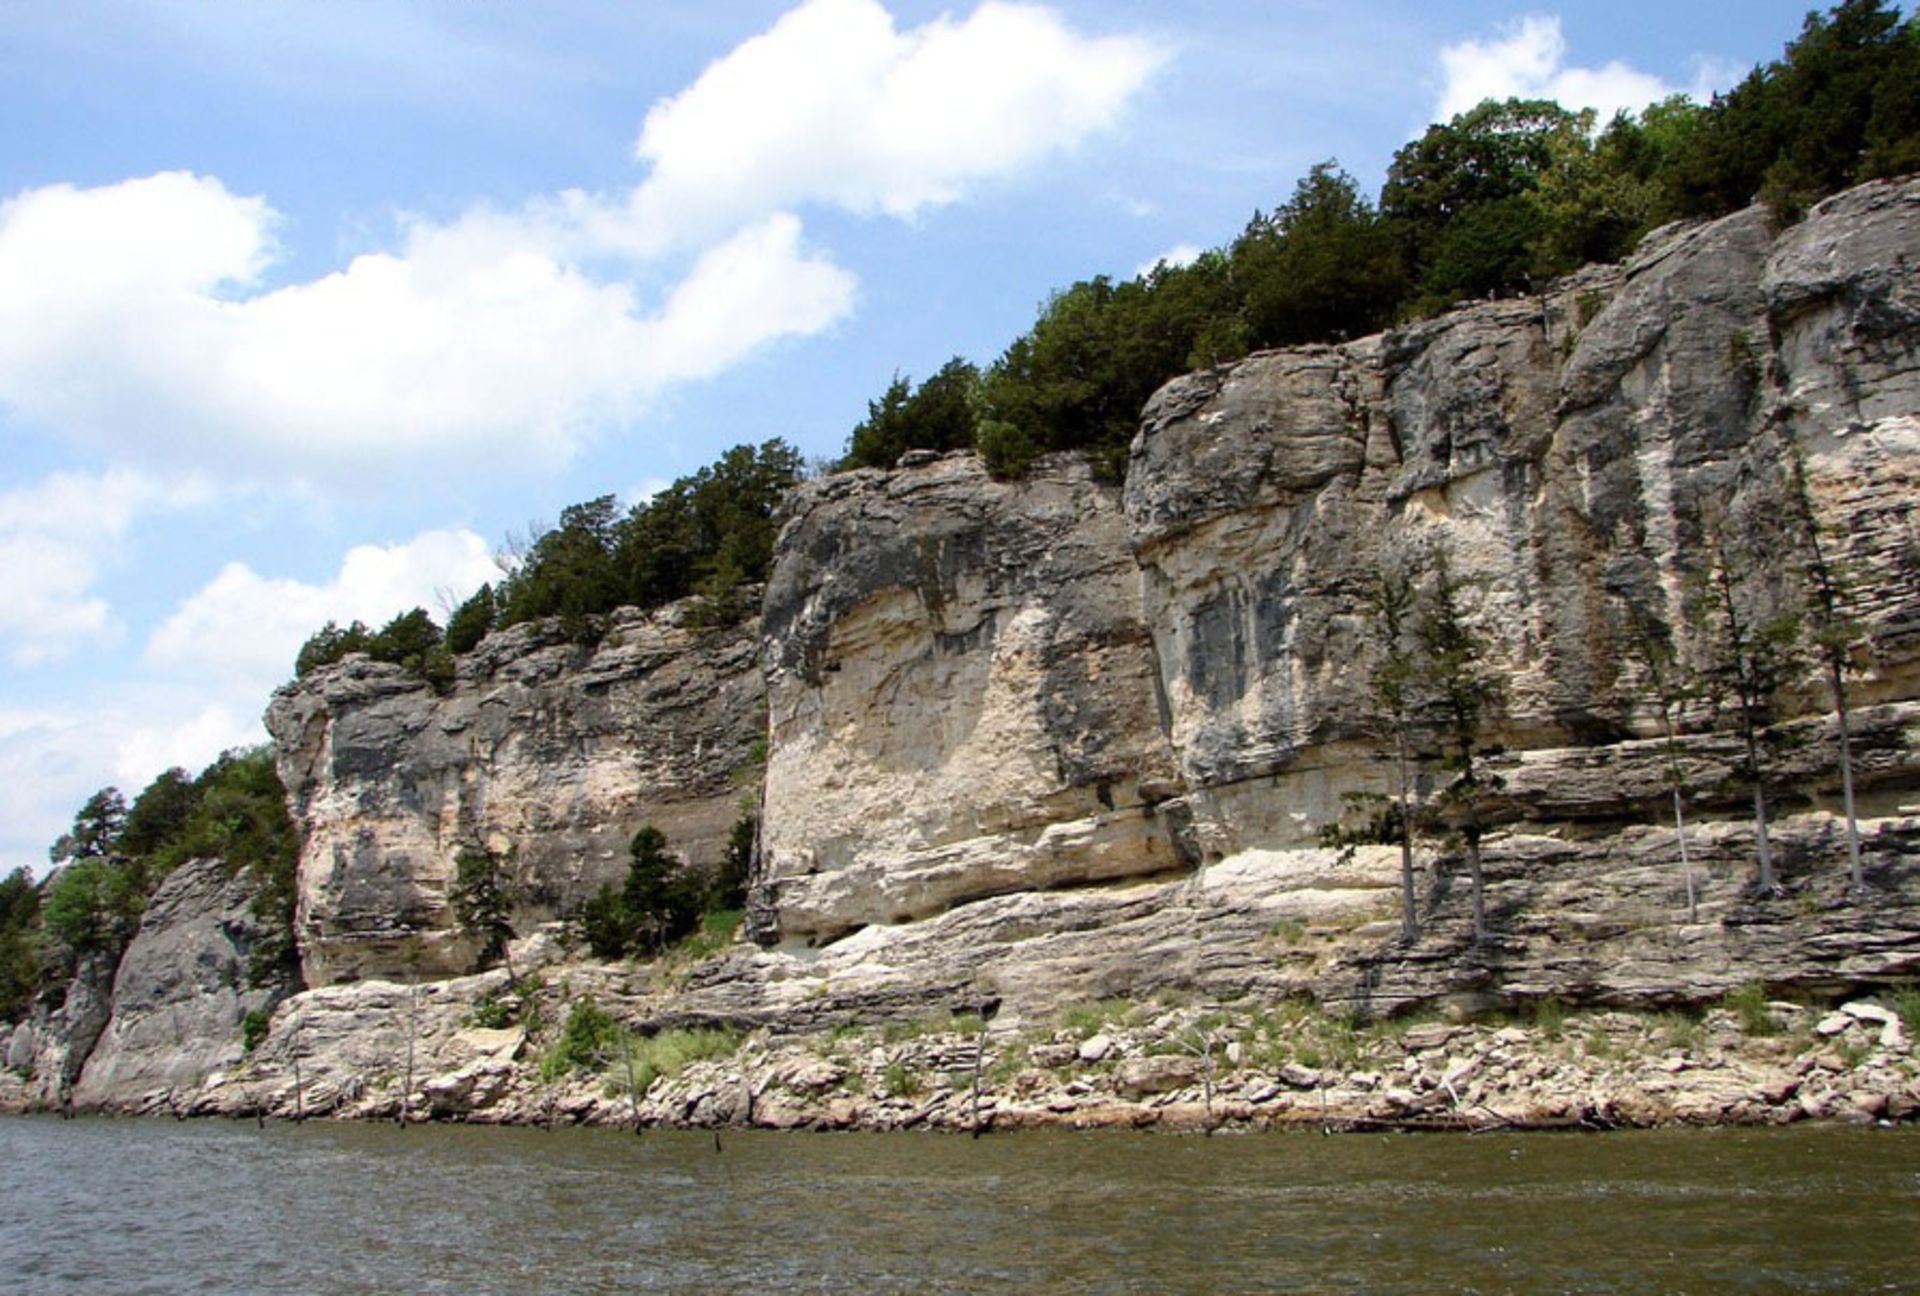 Claim Your Slice of Paradise: Own a Piece of St. Clair, Missouri, Where Camping Dreams Come True! - Image 15 of 15